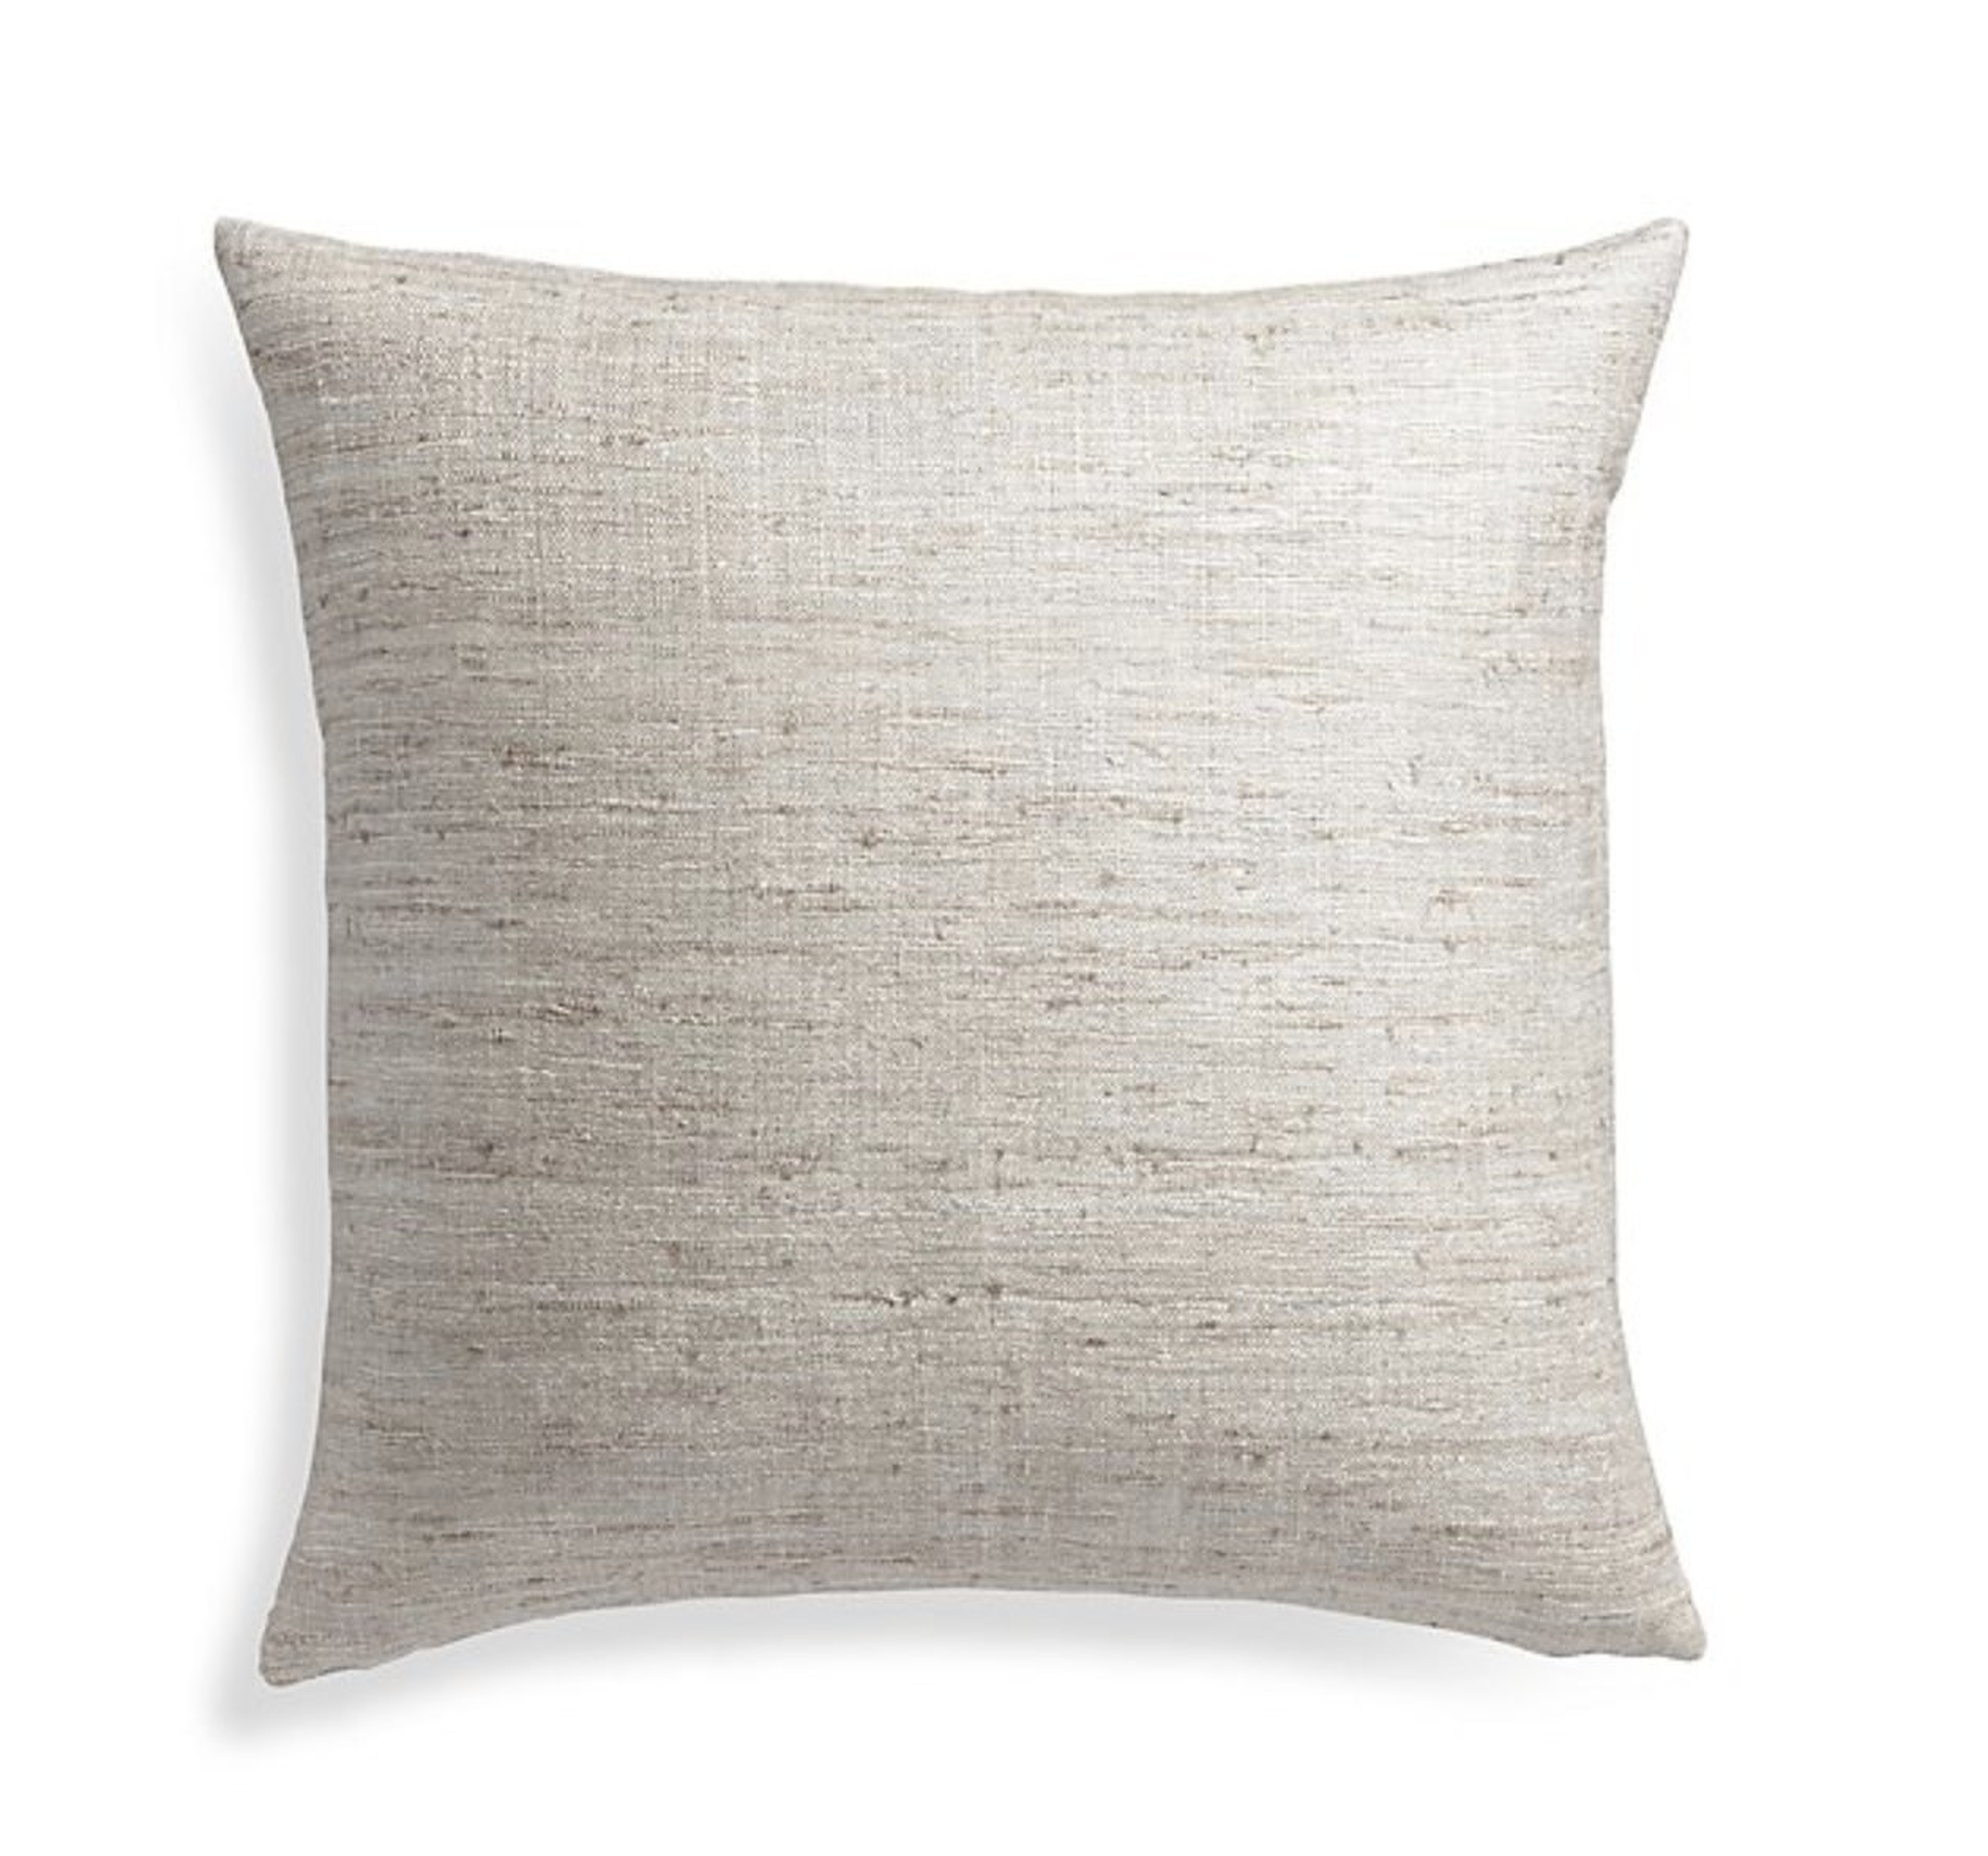 Trevino Alloy 20" Pillow with Down-Alternative Insert - Crate and Barrel